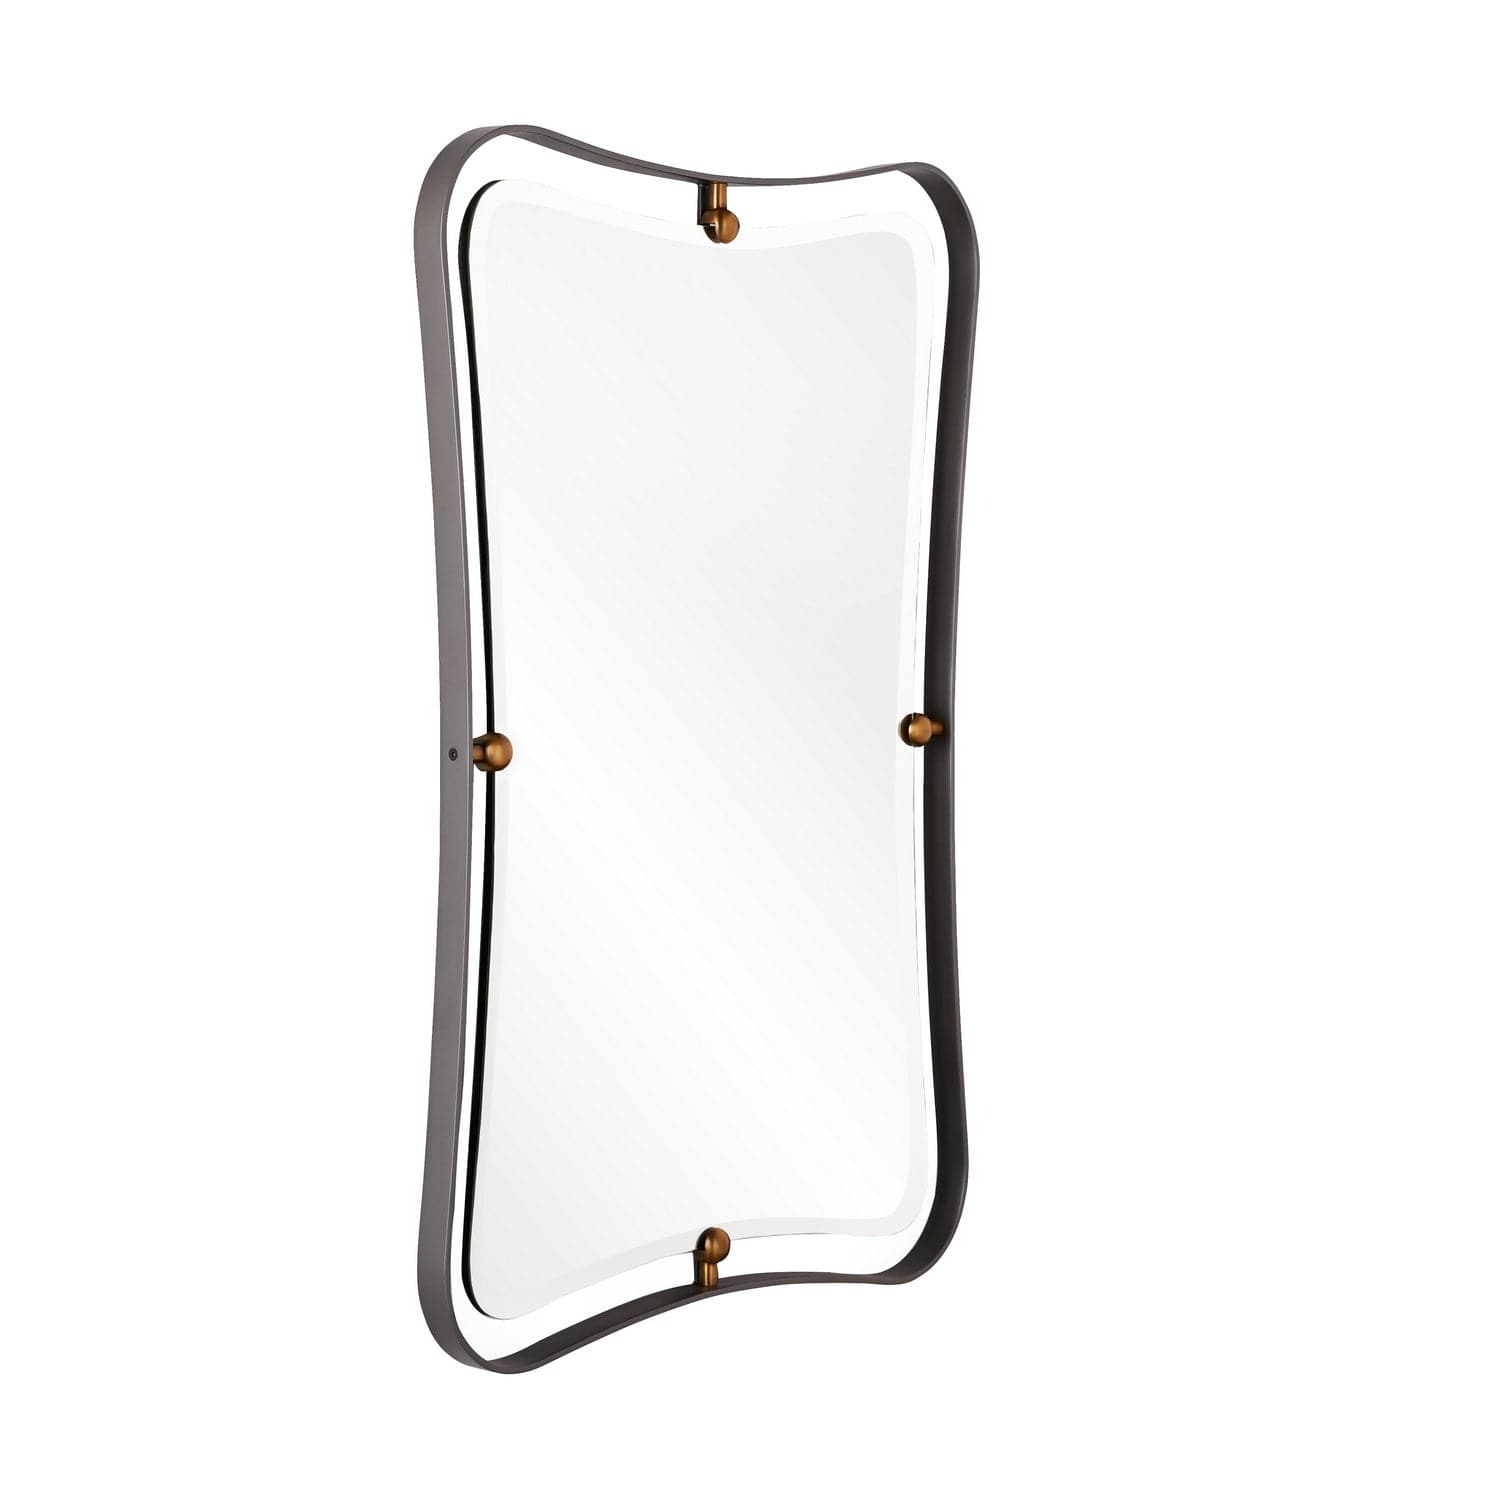 Mirror from the Janey collection in Natural Iron finish